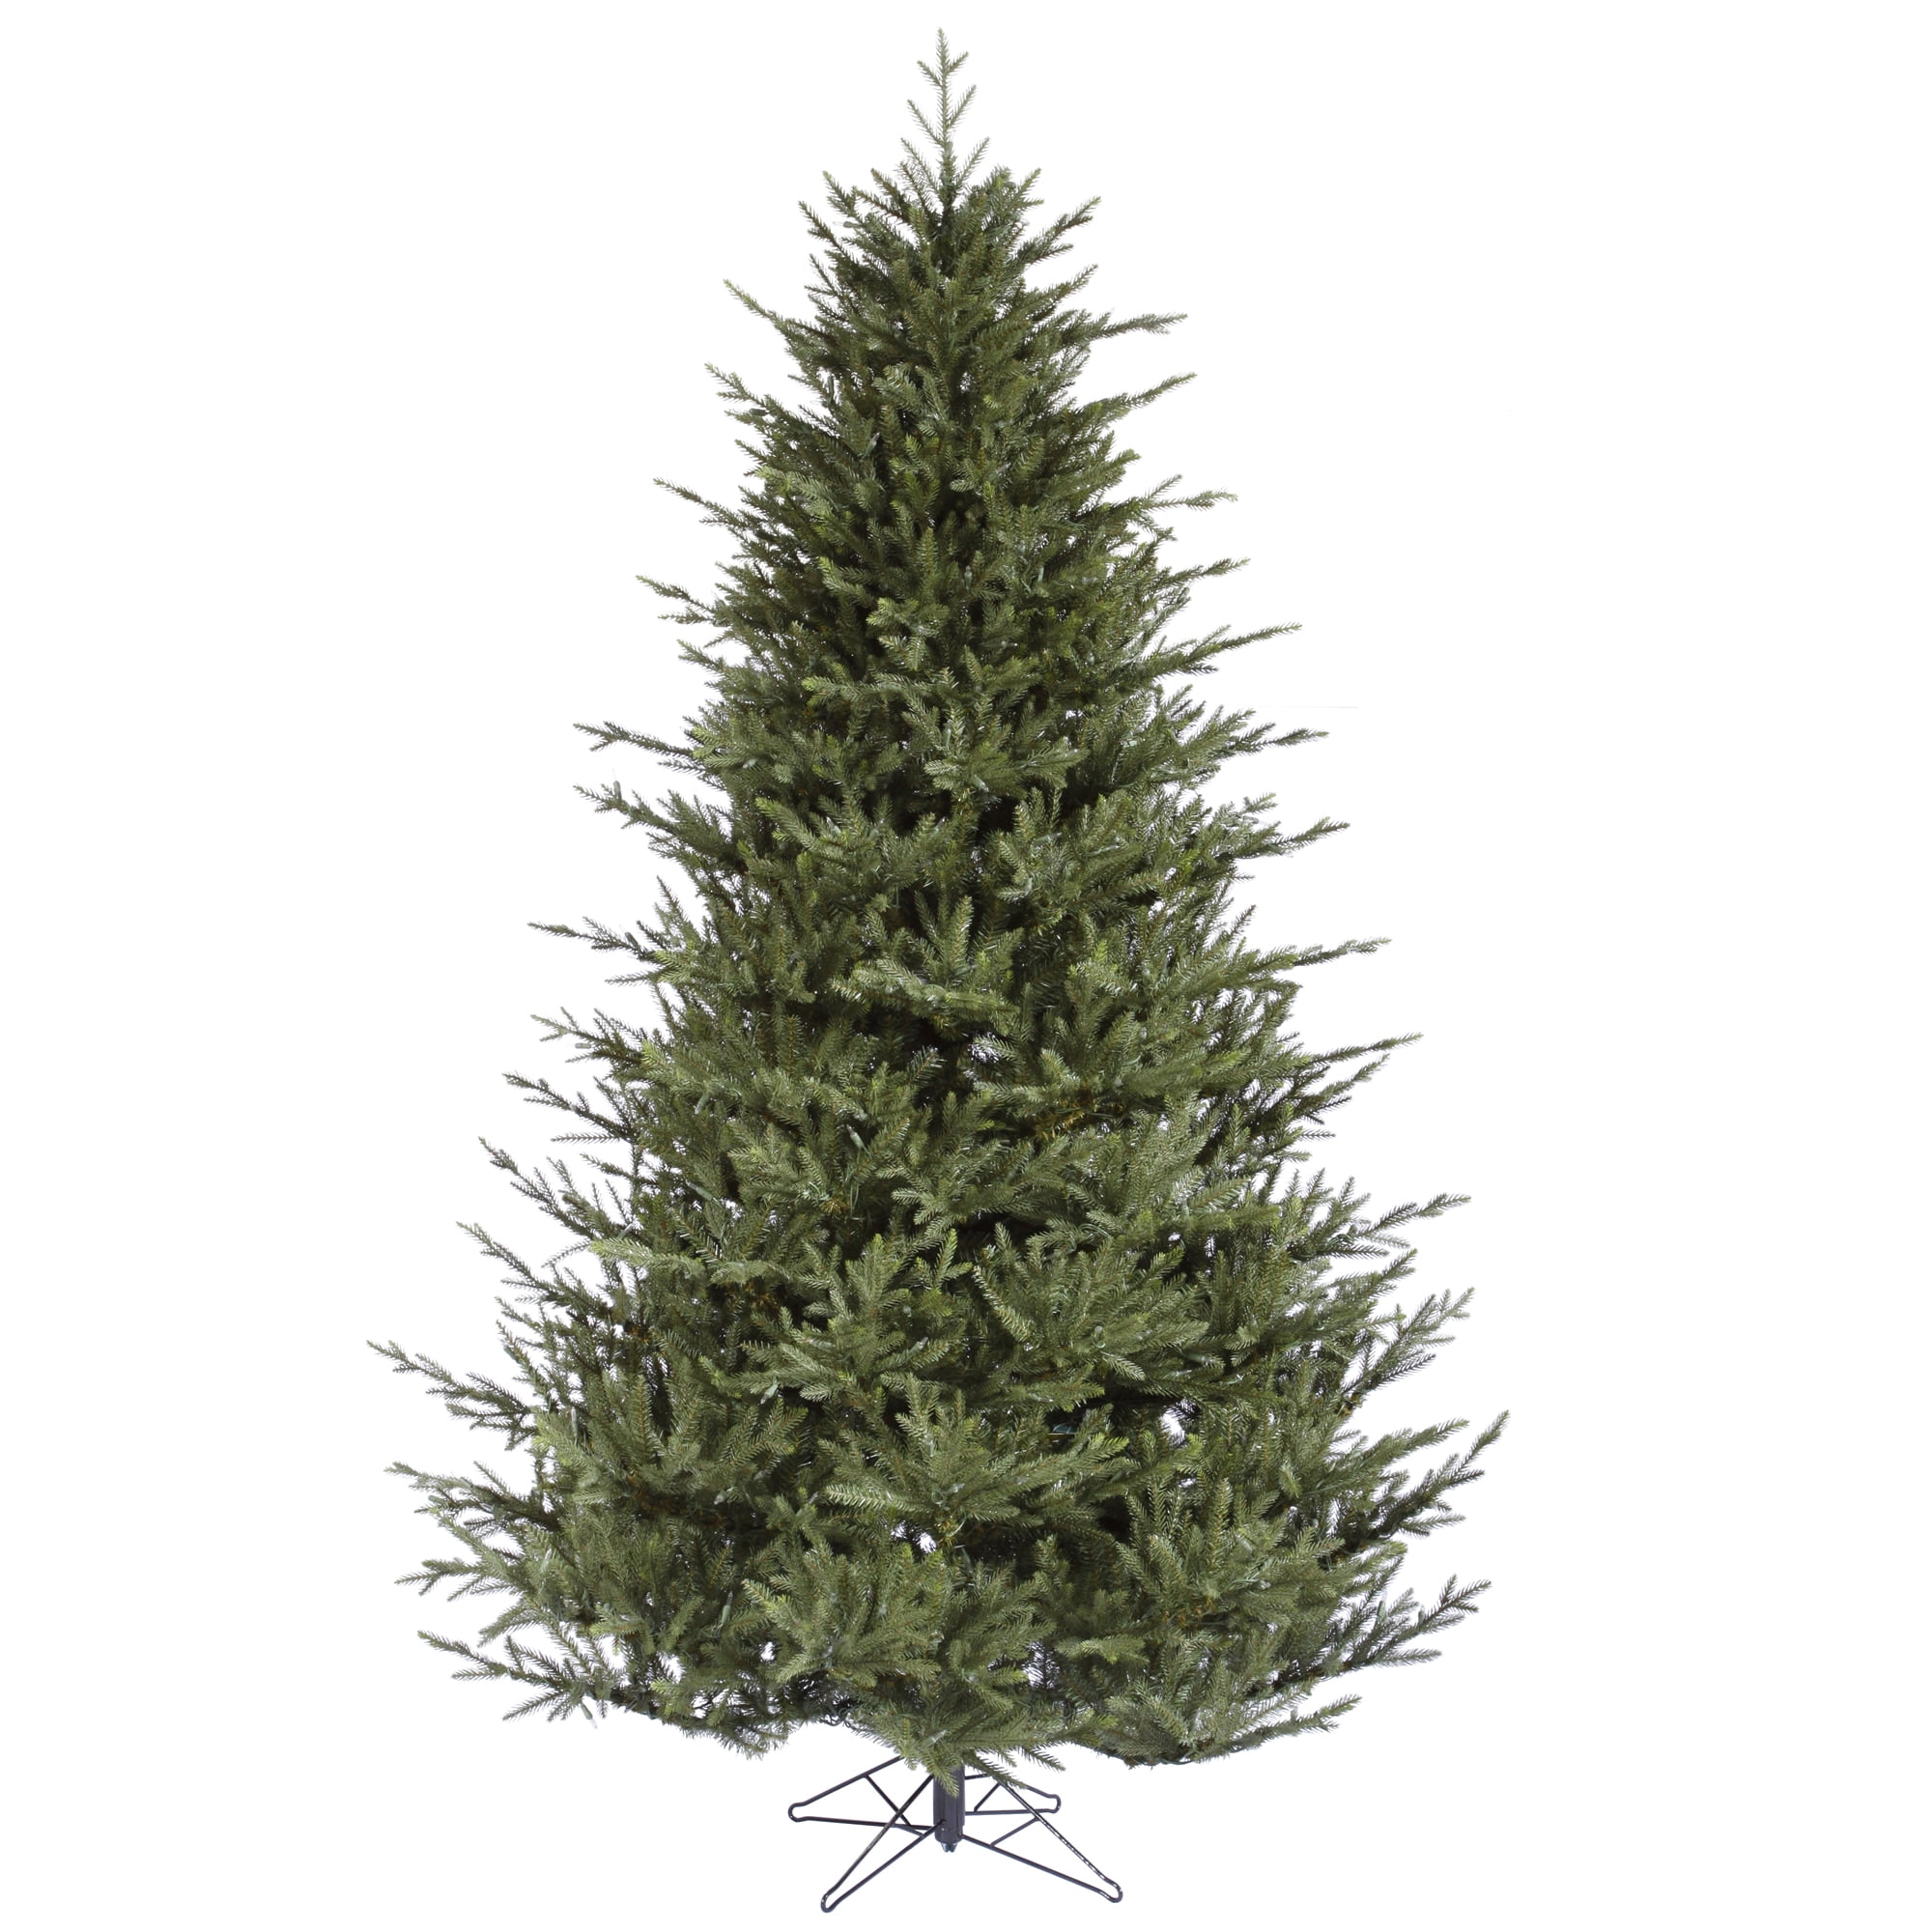 6.5 x 42 Vickerman Cashmere Slim Artificial Christmas Tree with 450 Clear Lights